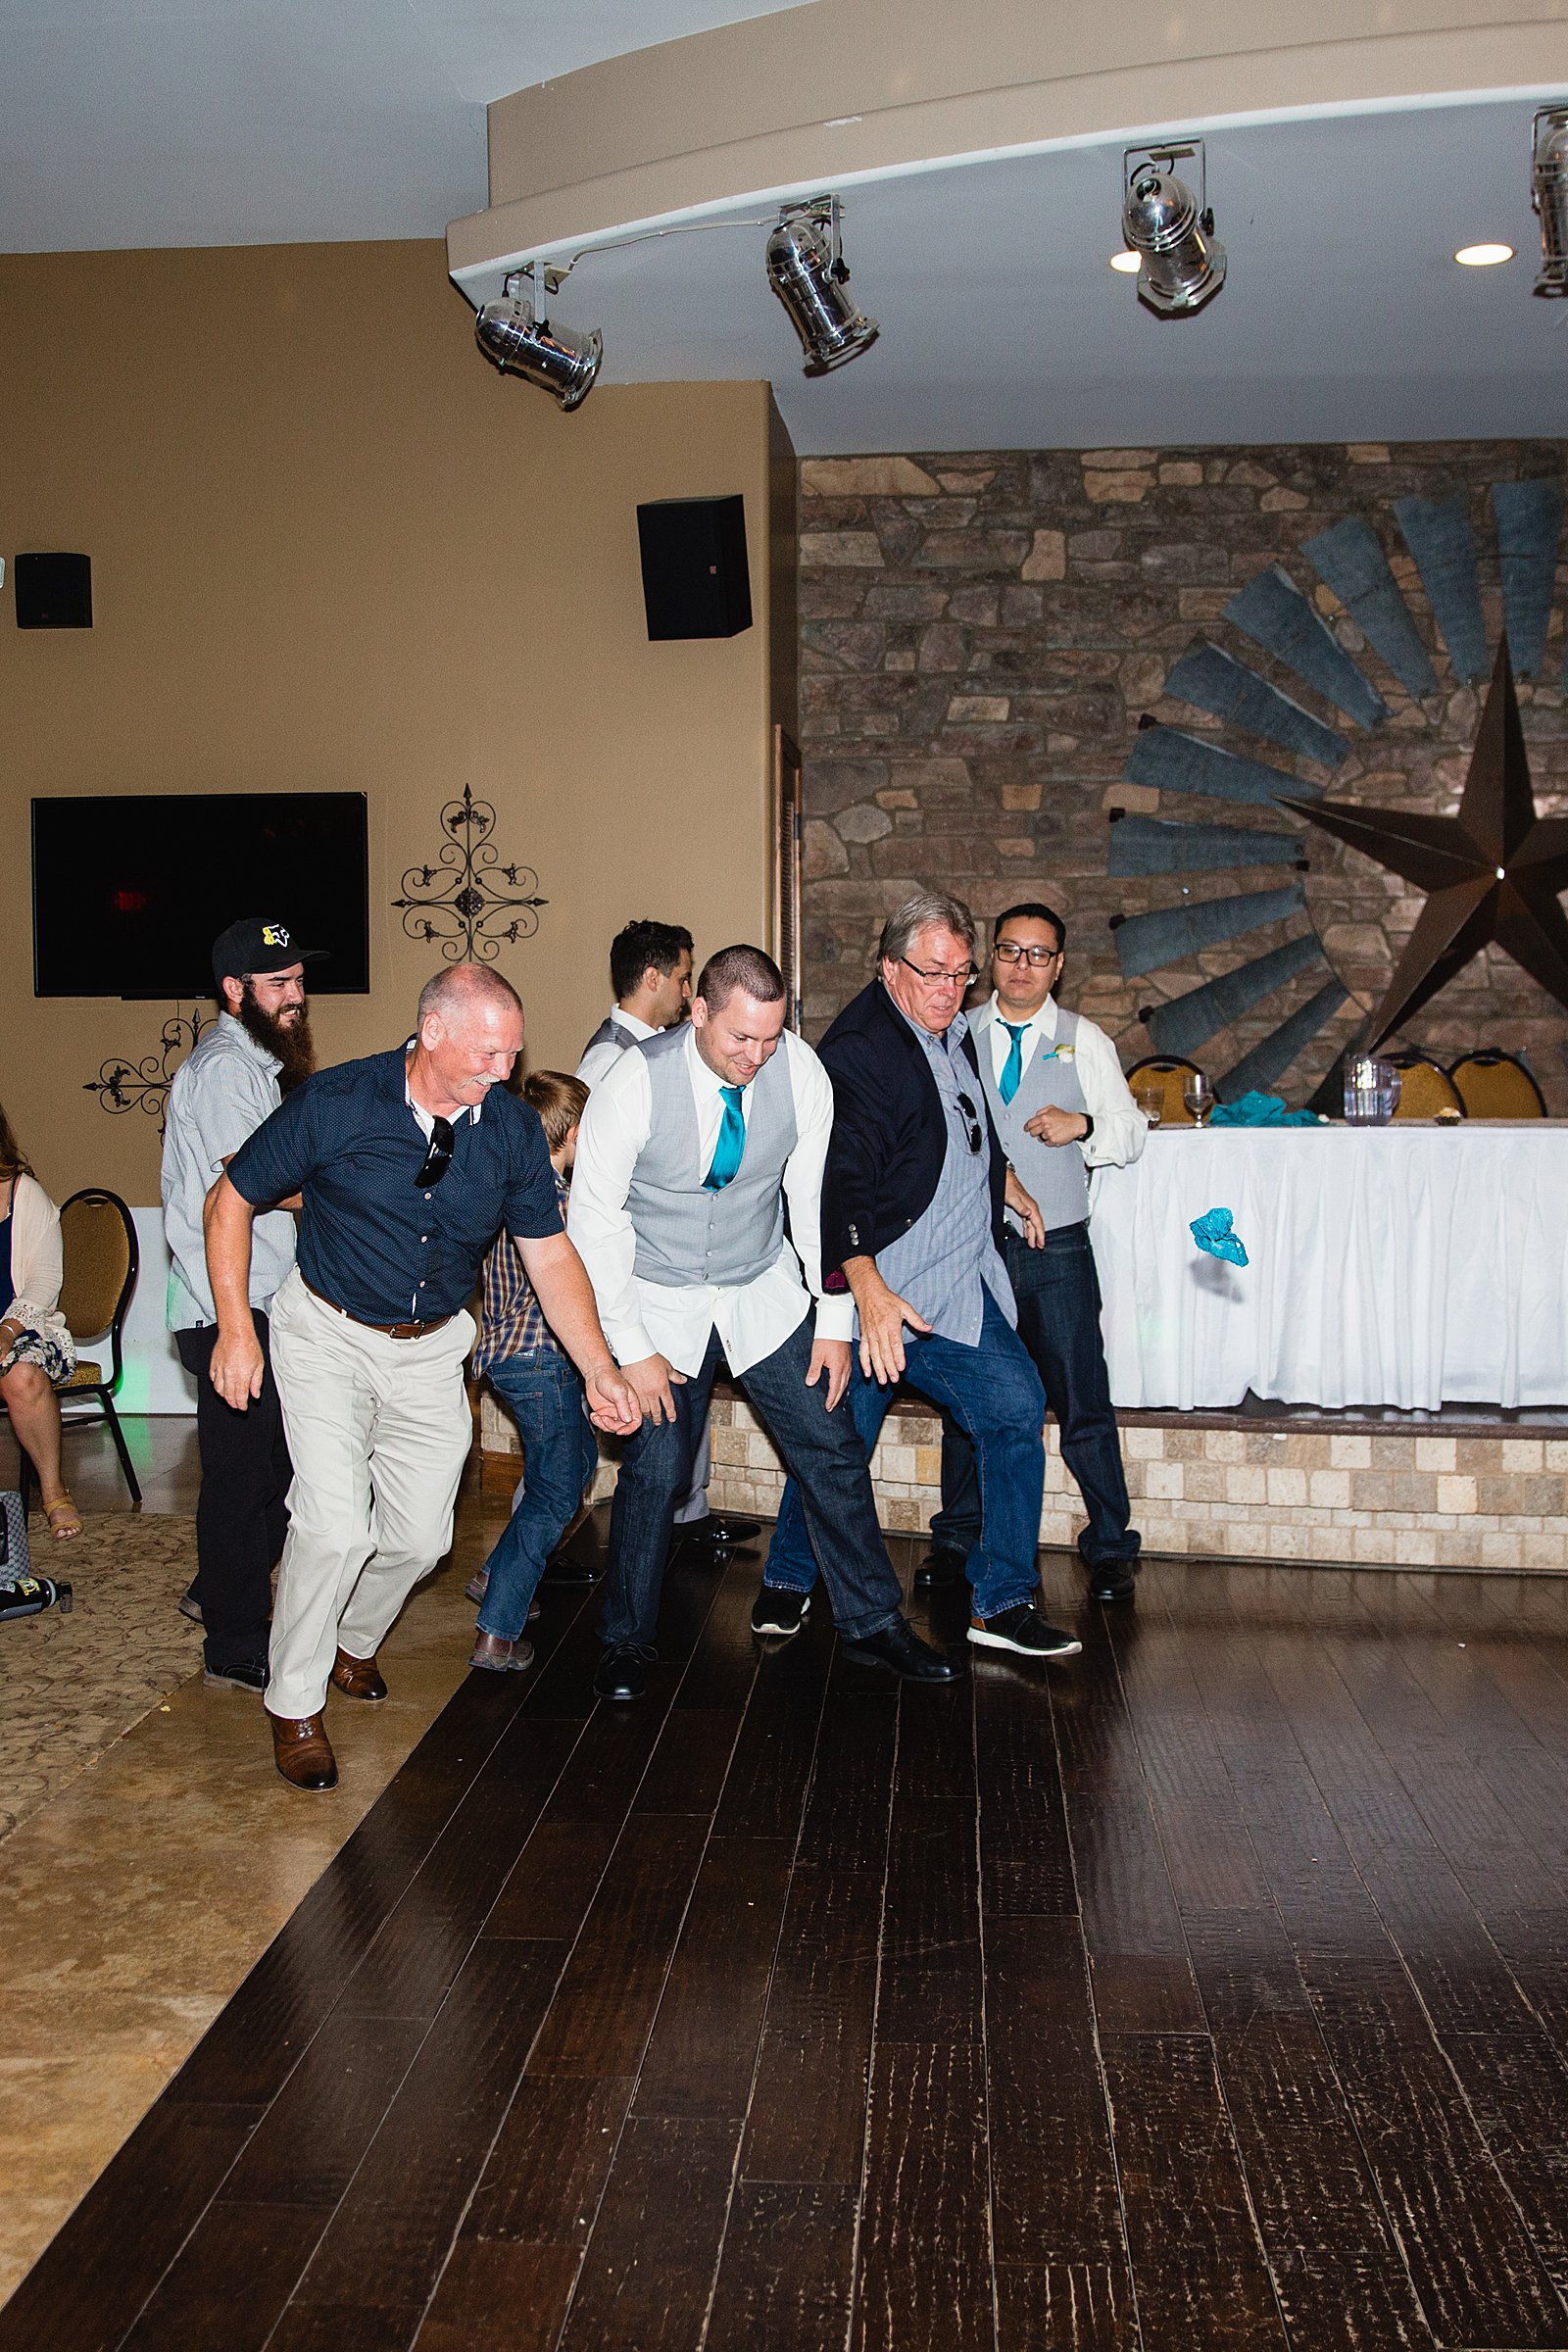 Garter toss at The Windmill House wedding reception by Chino Valley wedding photographer PMA Photography.